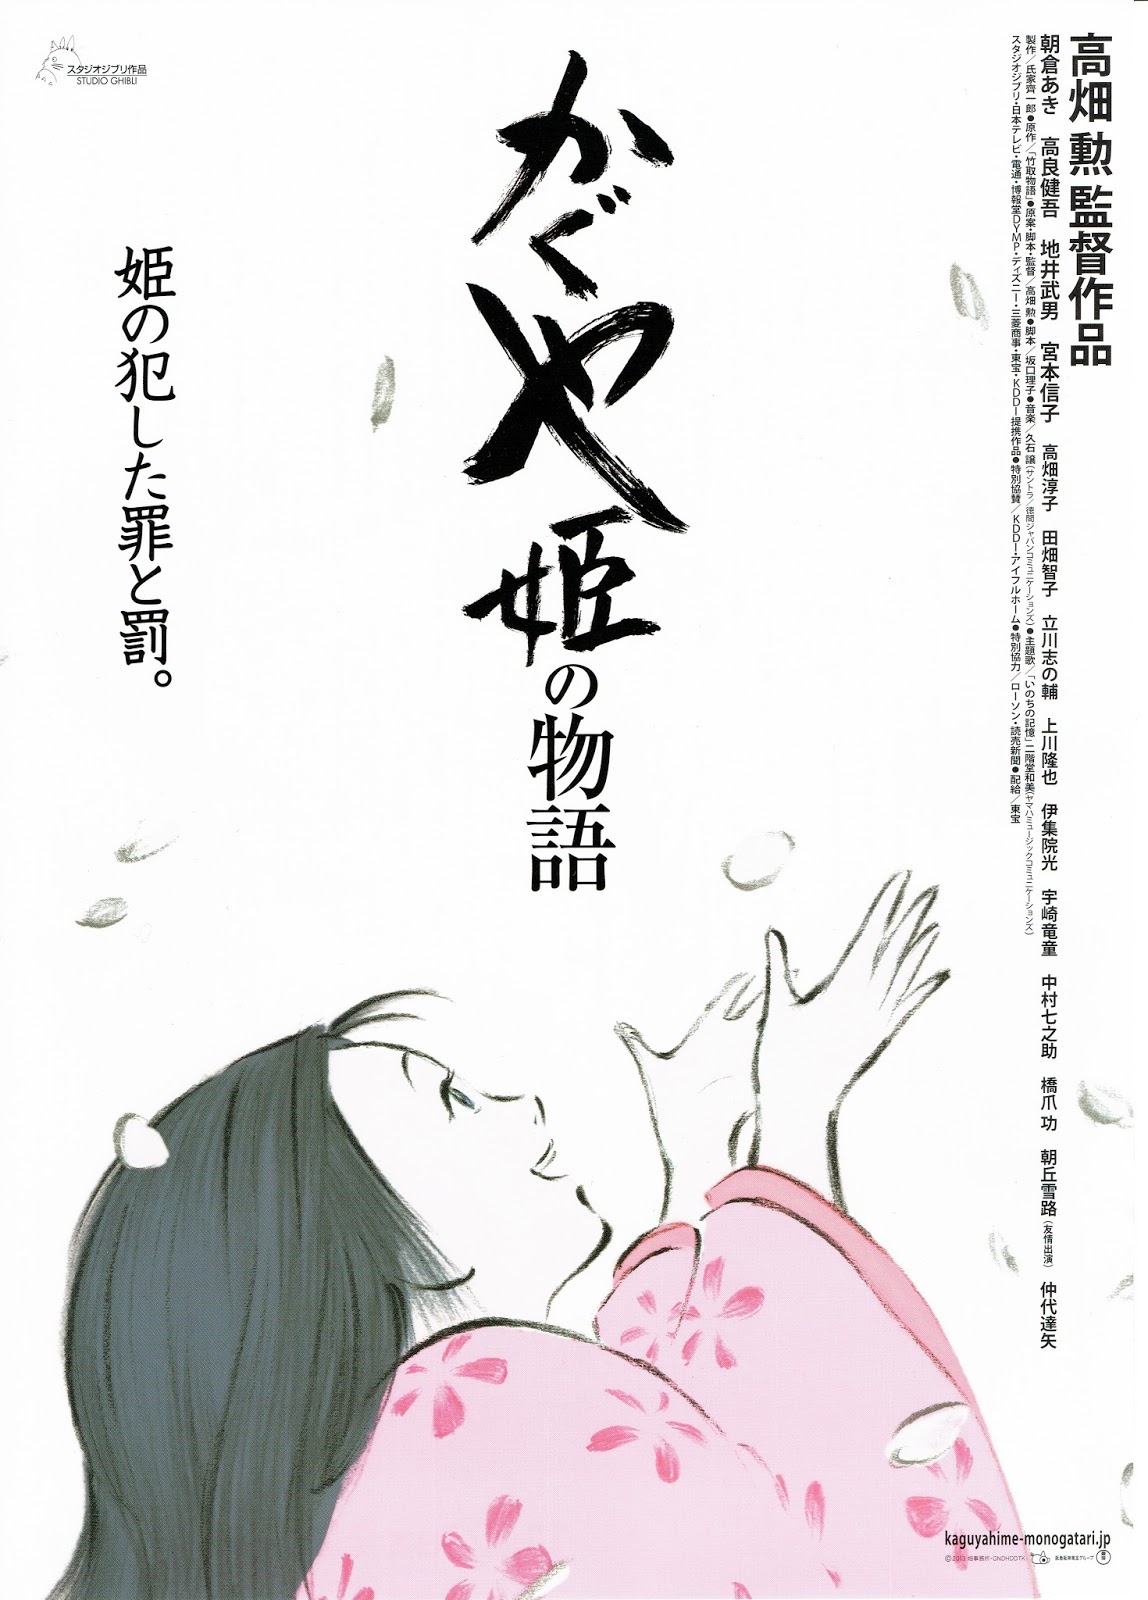 Watch «かぐや姫の物語 (The Tale of the Princess Kaguya): かぐや姫の物語» with original  japanese voice and interactive subtitles